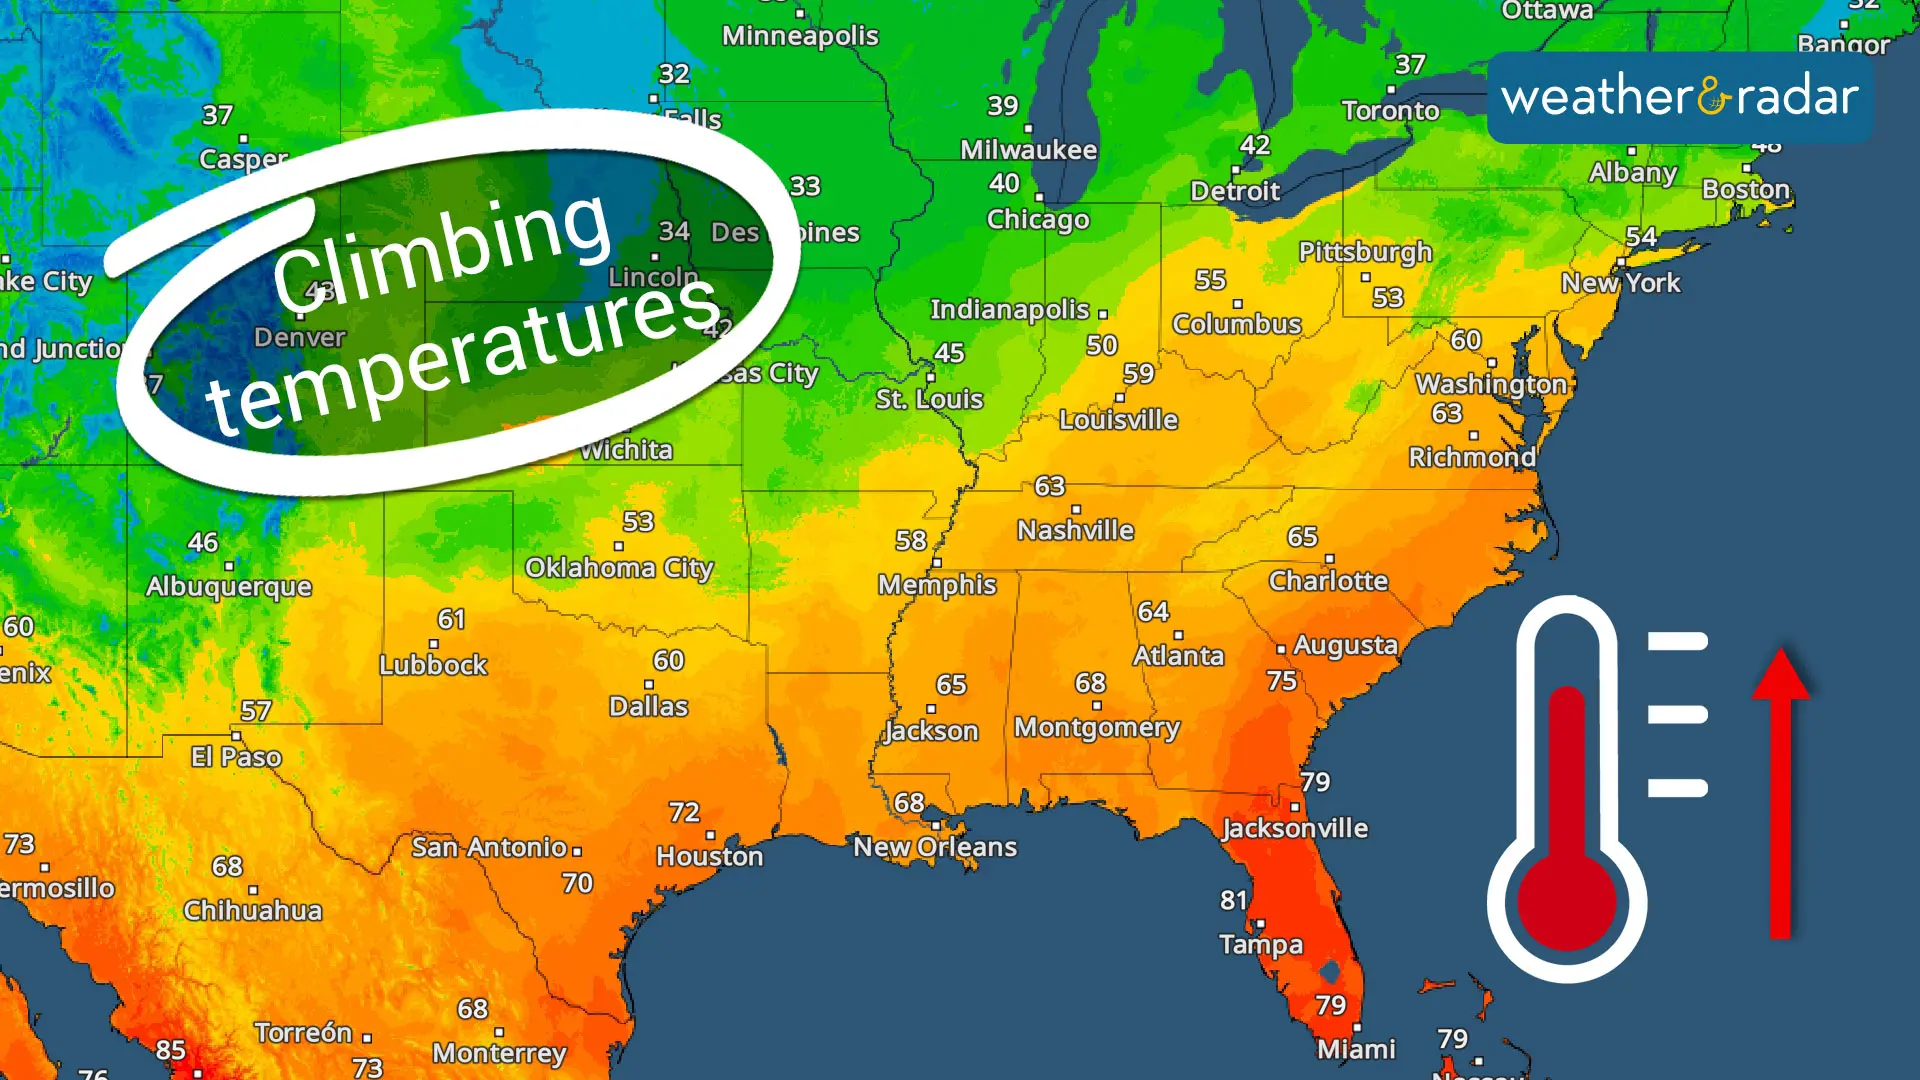 Climbing temperatures this week will give many a spring preview.